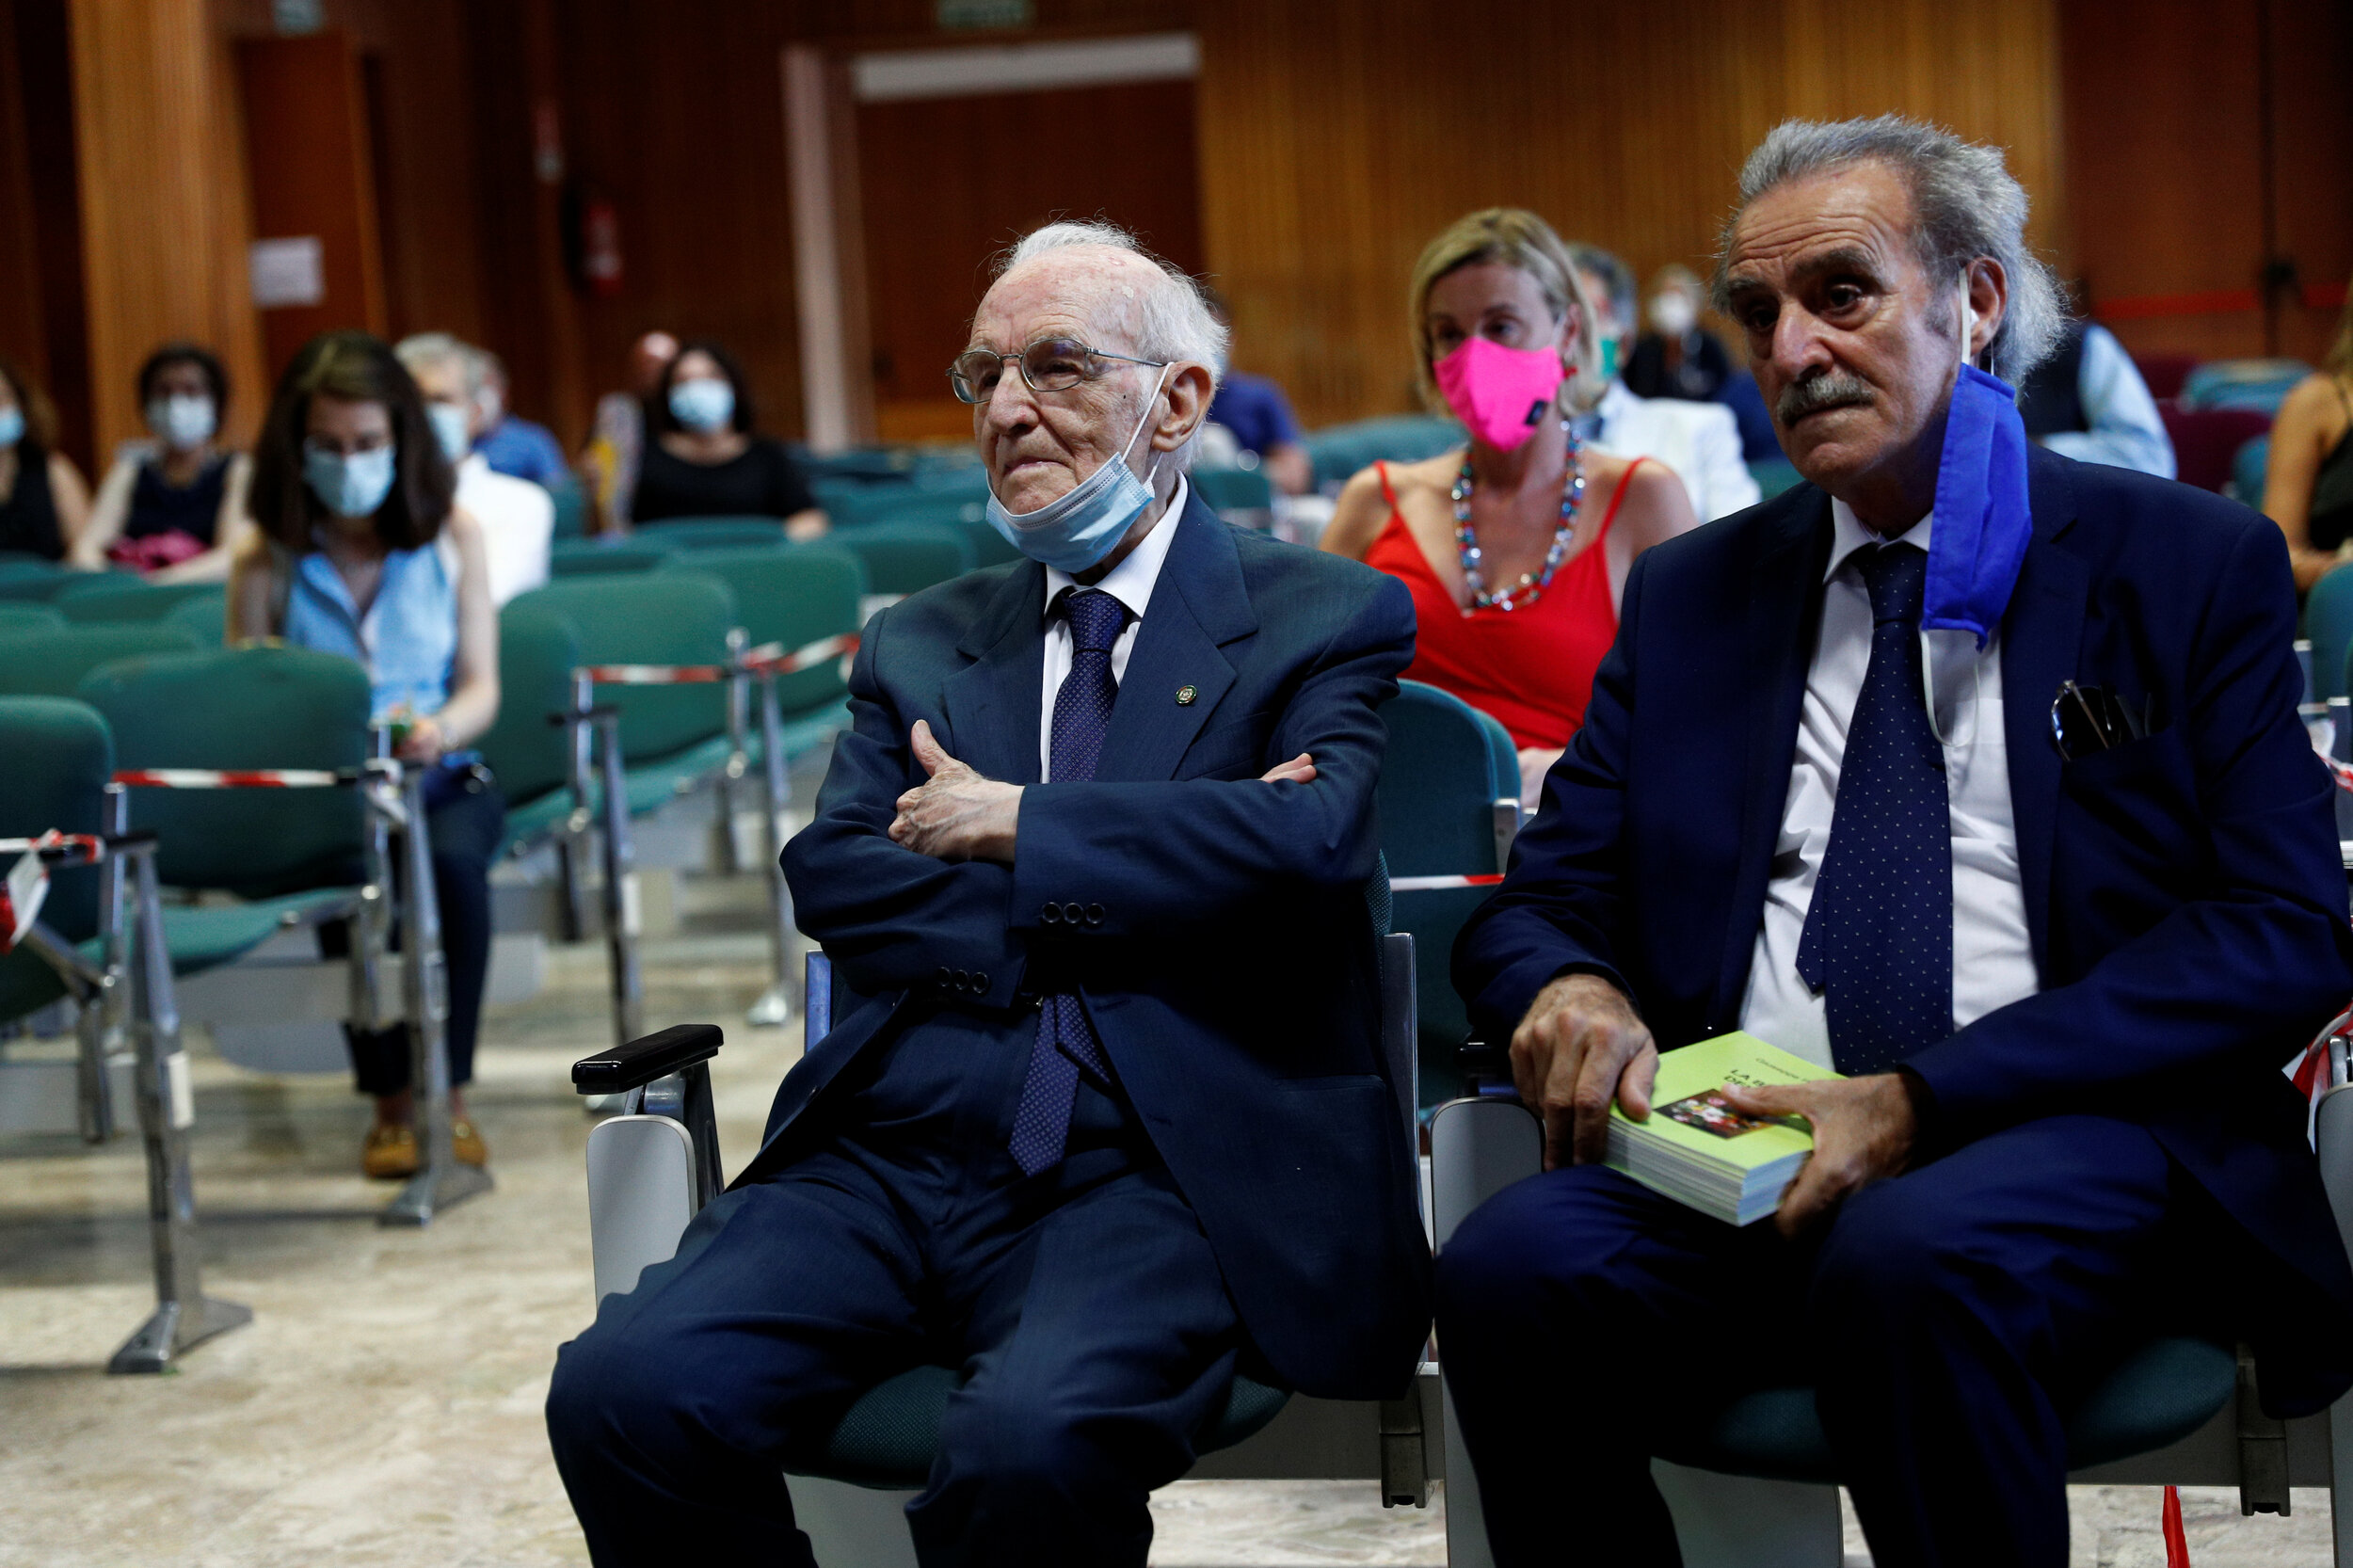  Giuseppe Paterno, 96, Italy's oldest student, attends his graduation, which had social distancing measures in place, after completing his undergraduate degree in history and philosophy at the University of Palermo, during the coronavirus disease (CO